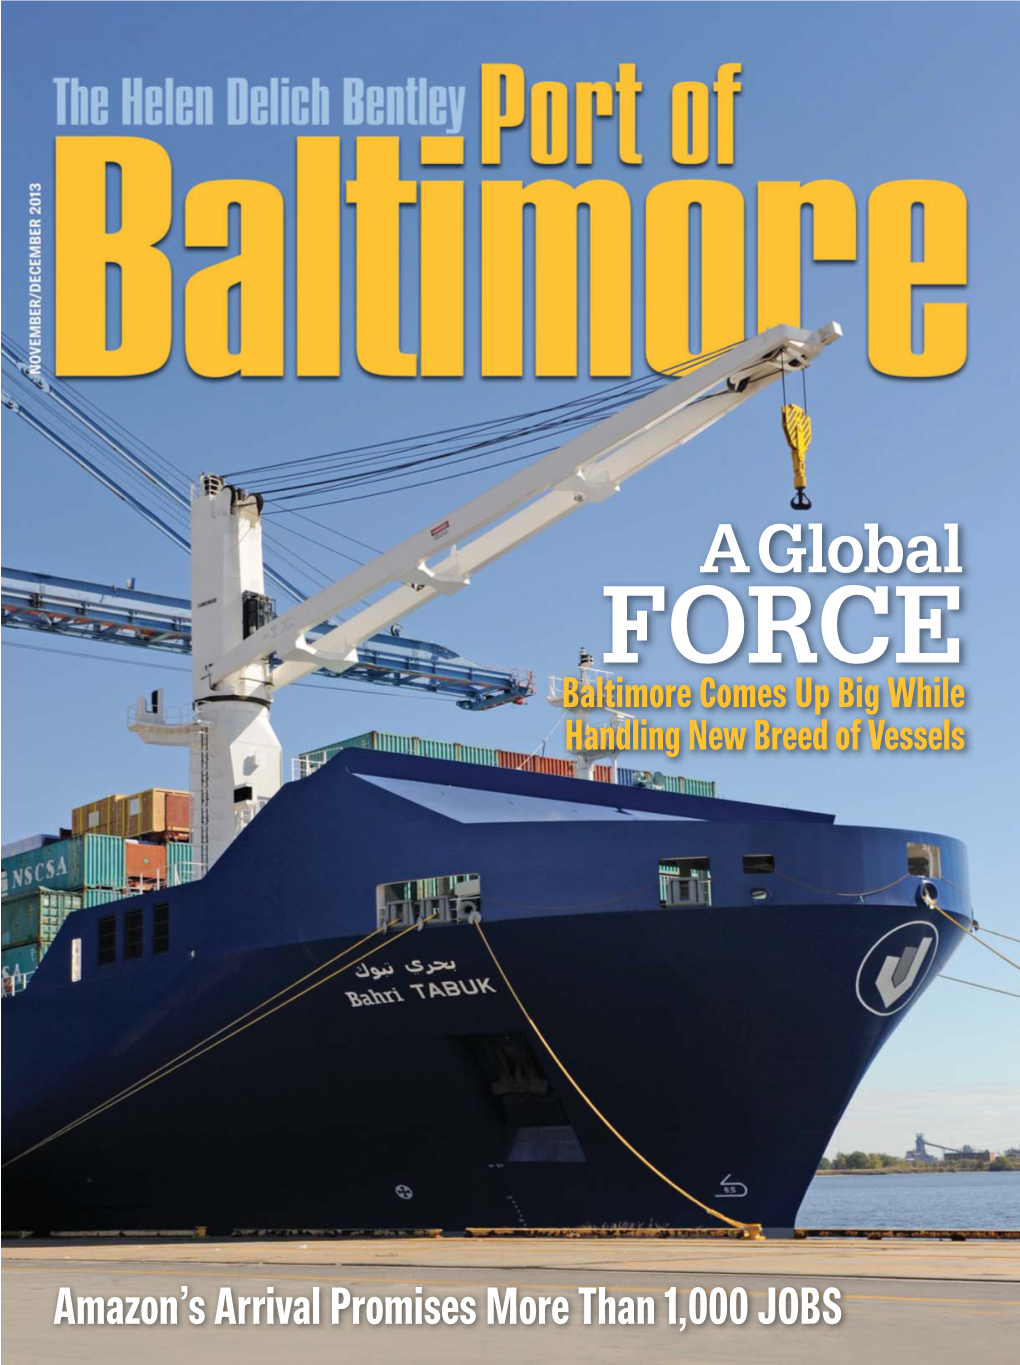 A Global FORCE Baltimore Comes up Big While Handling New Breed of Vessels